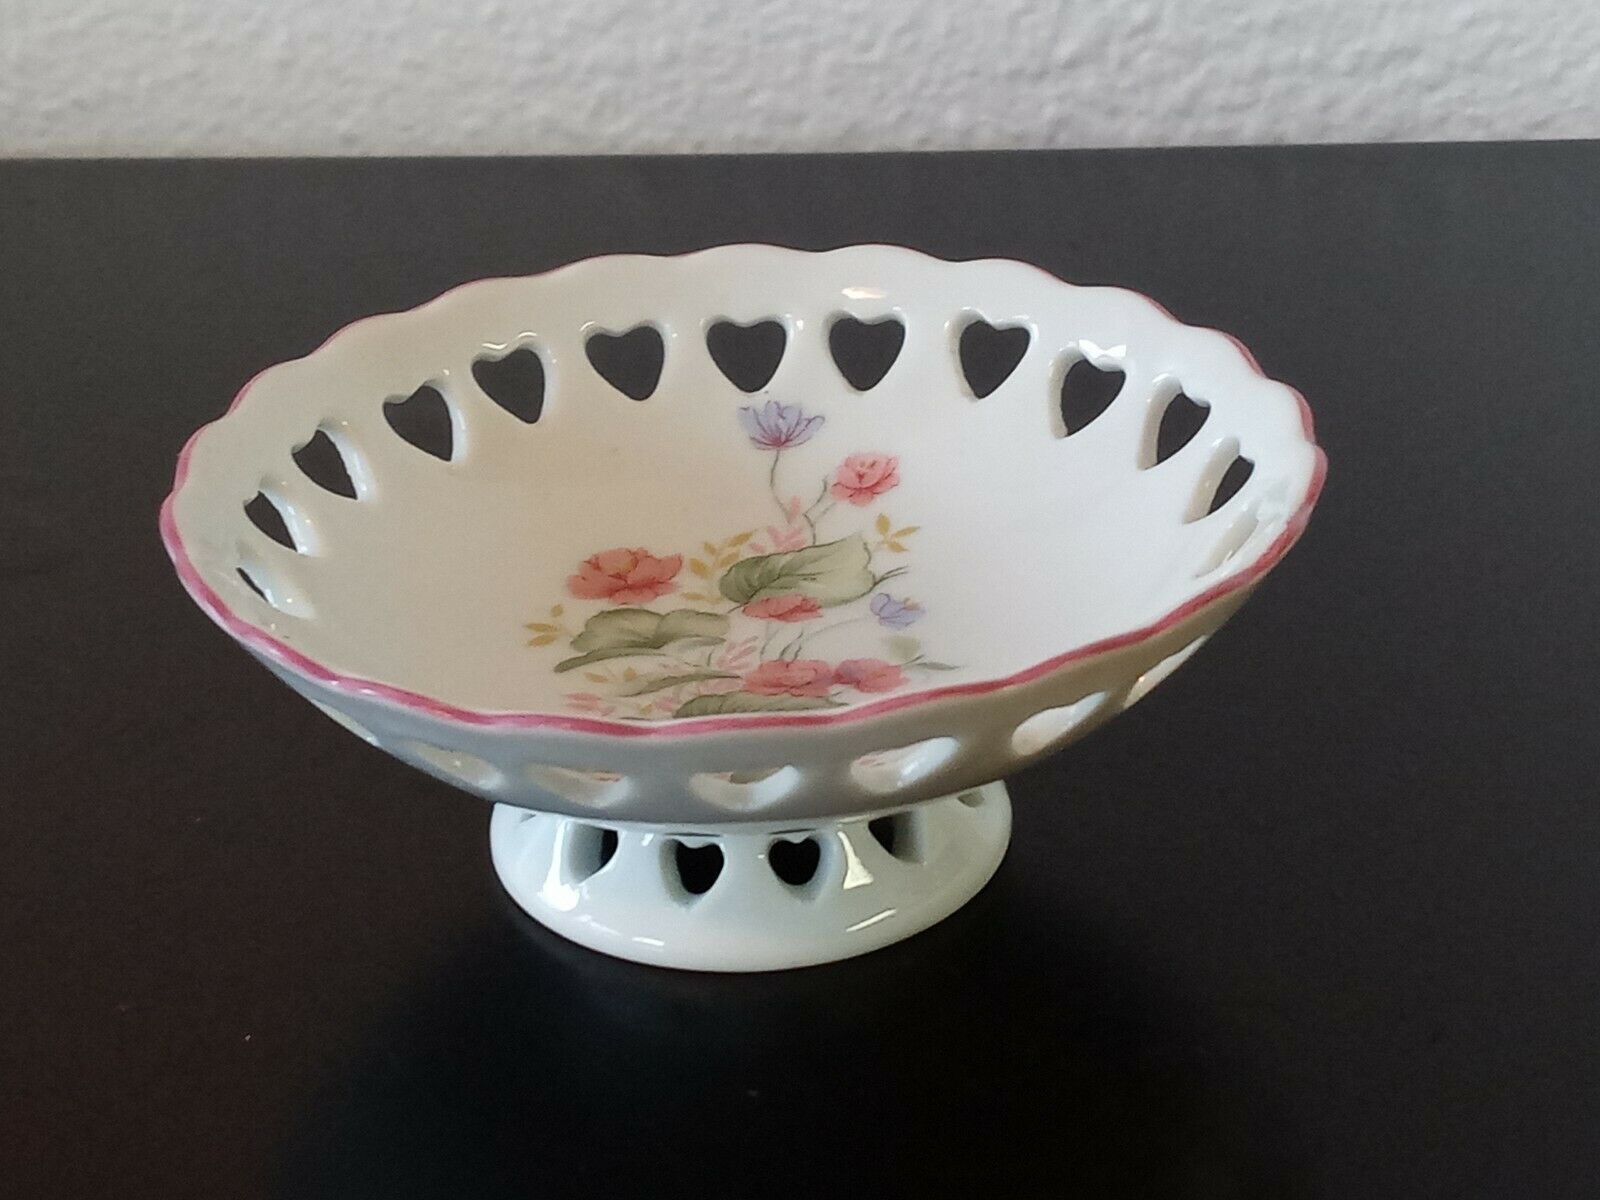 Small Reutter Floral Heart Reticulated Porzellan Footed Trinket Dish ~ Germany